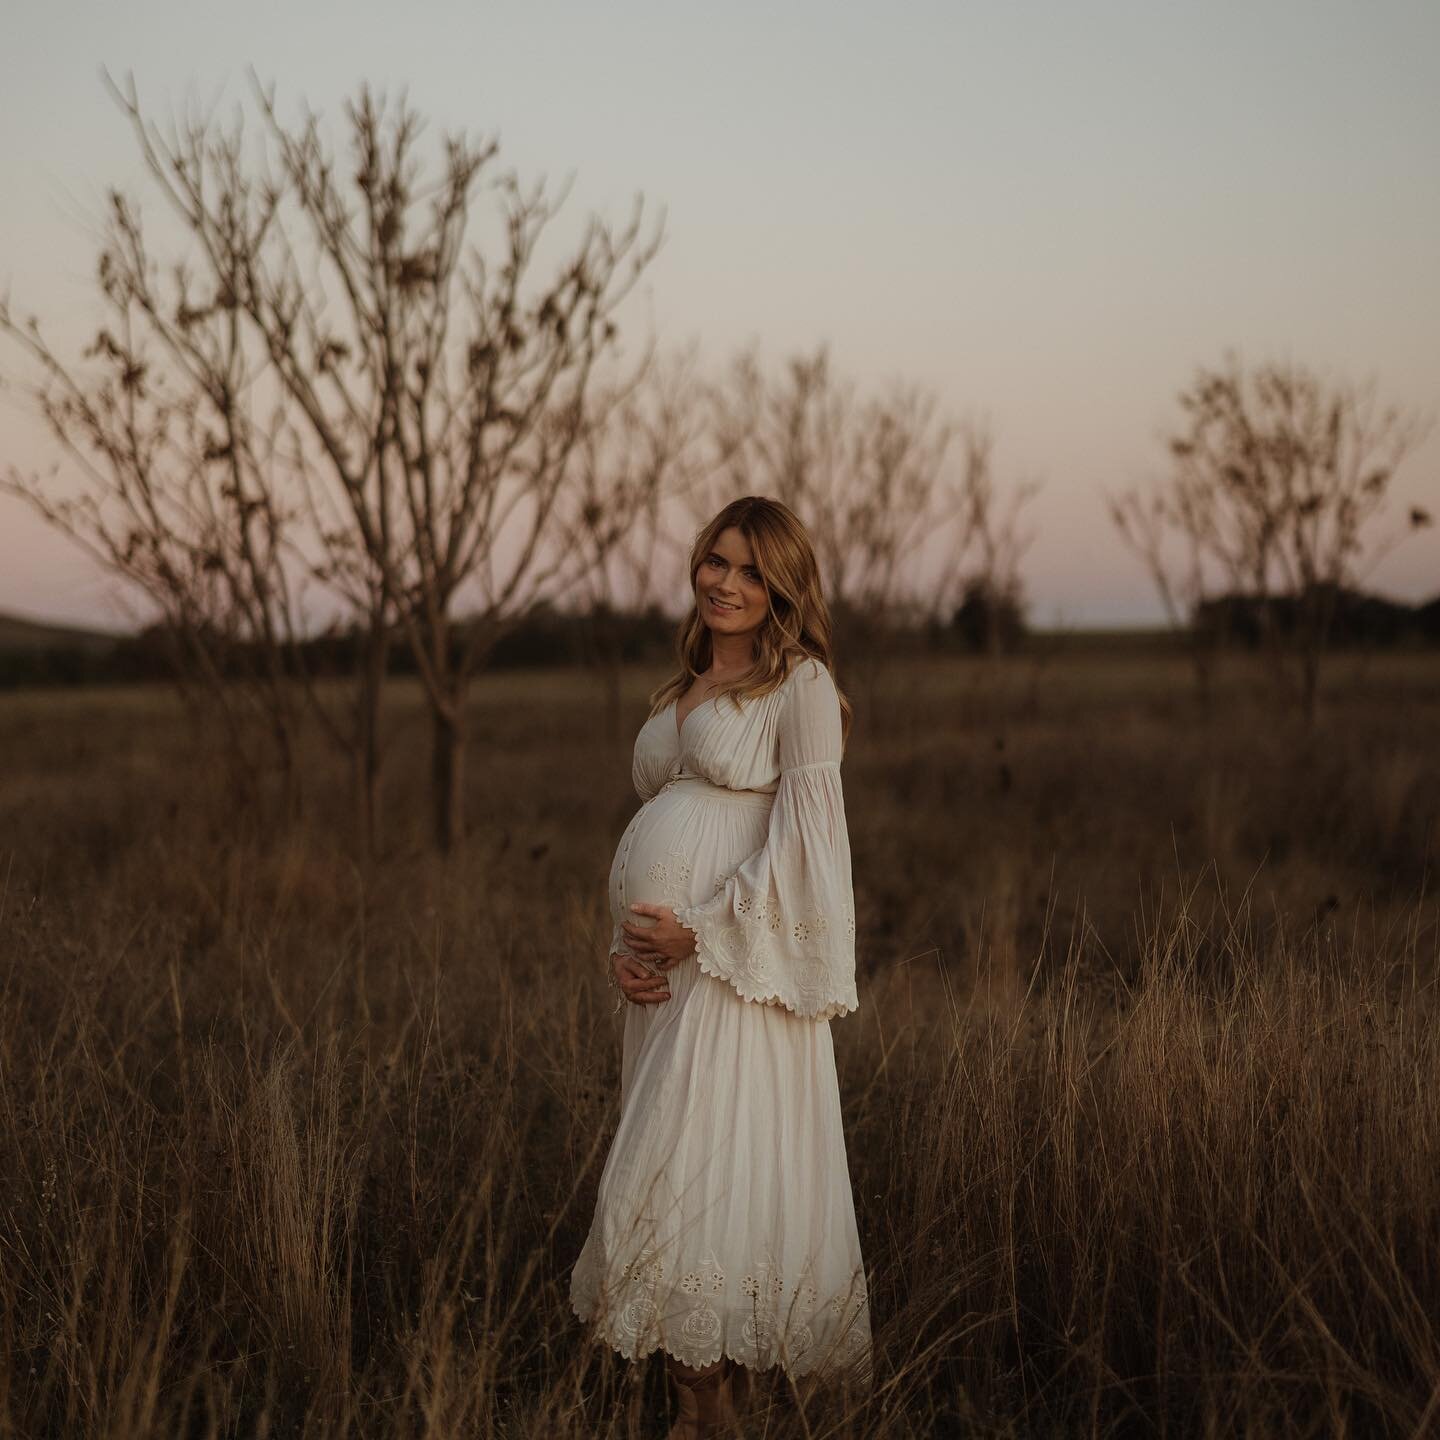 Last light with this absolute beauty✨

#erinnredfernphotography 
#centralwestnsw 
#centralwestnswphotographer 
#wellingtonphotographer 
#mudgeephotographer 
#dubbophotographer 
#orangephotographer 
#maternityphotographer 
#maternityphotography 
#preg